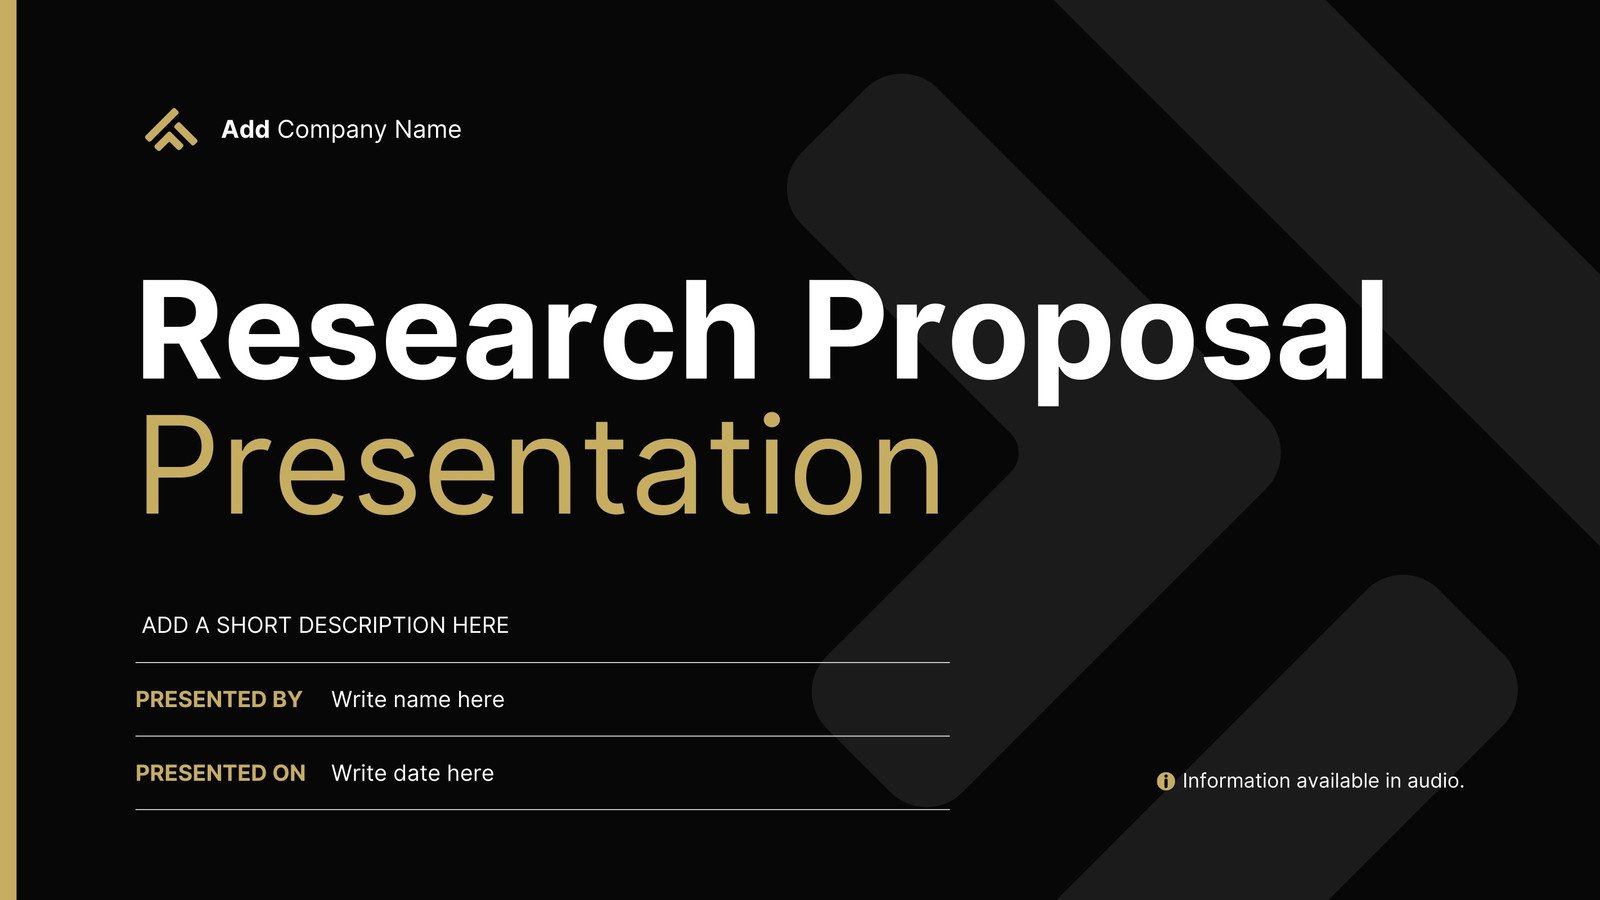 ppt template for research proposal